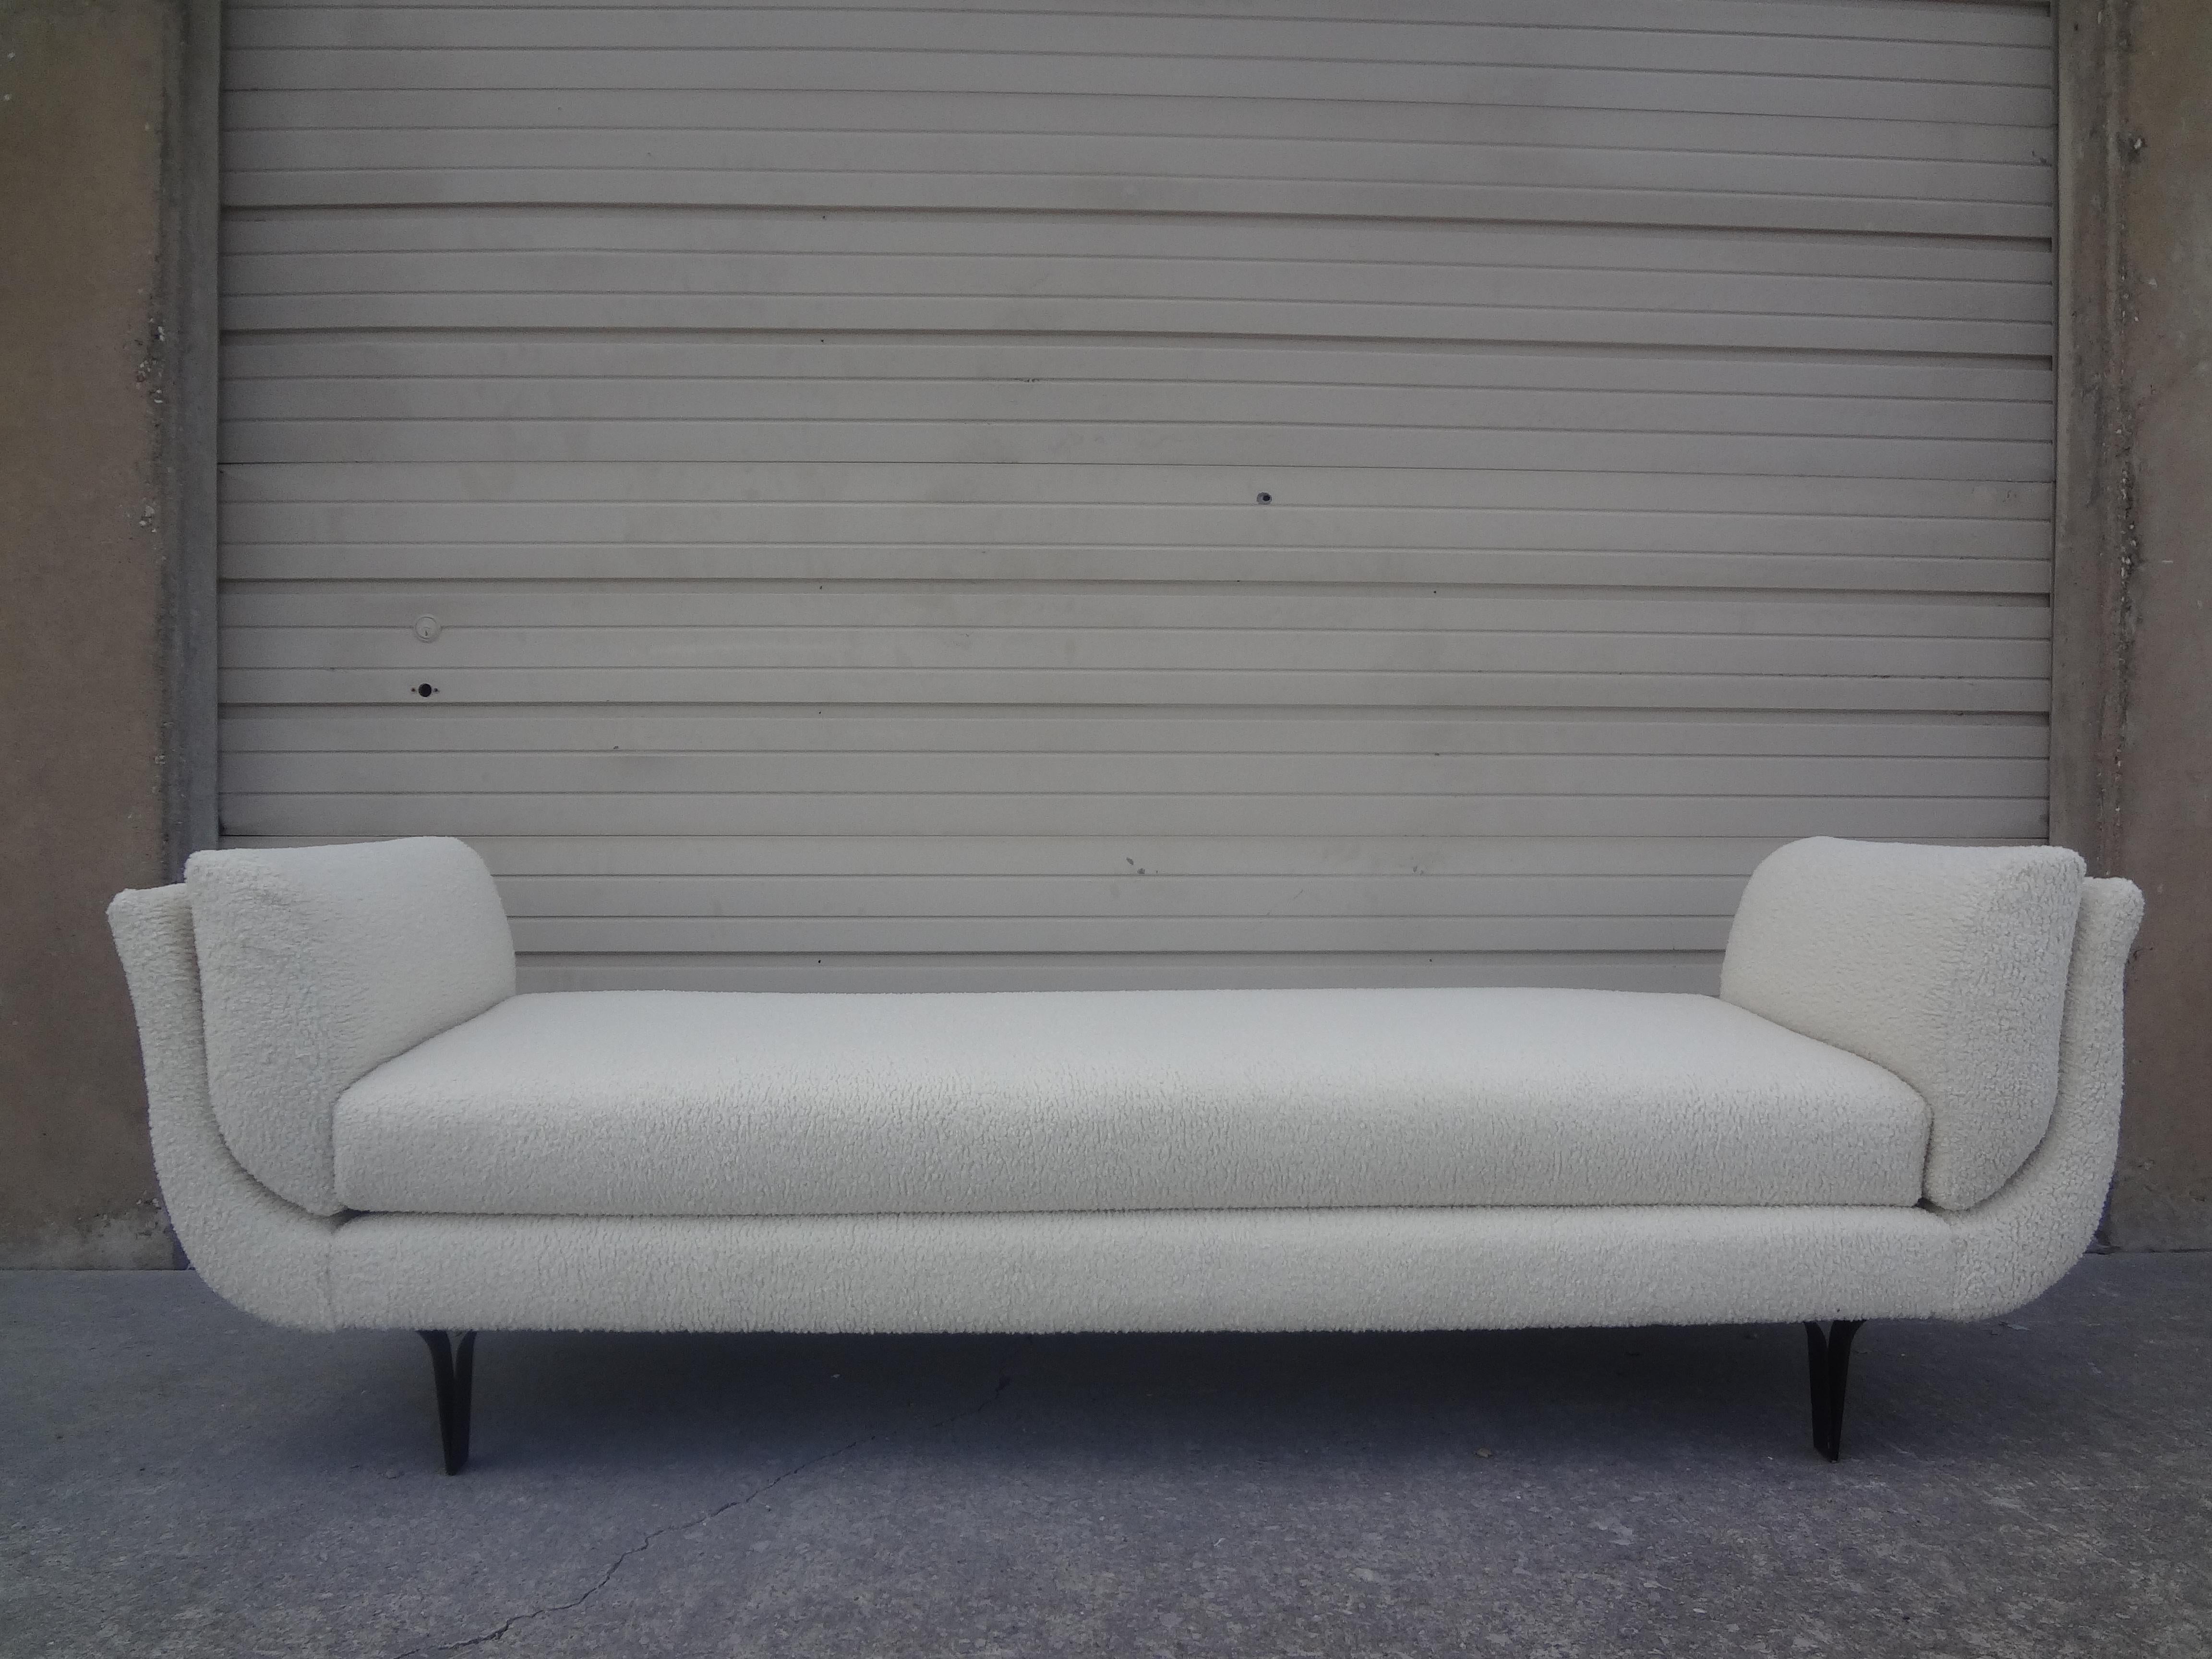 Italian Modern daybed or bench attributed to Osvaldo Borsani. This shapely long Italian bench, daybed or chaise has interesting iron legs and has been professionally upholstered in plush cream boucle that is both sculptural and stunning. Our Italian